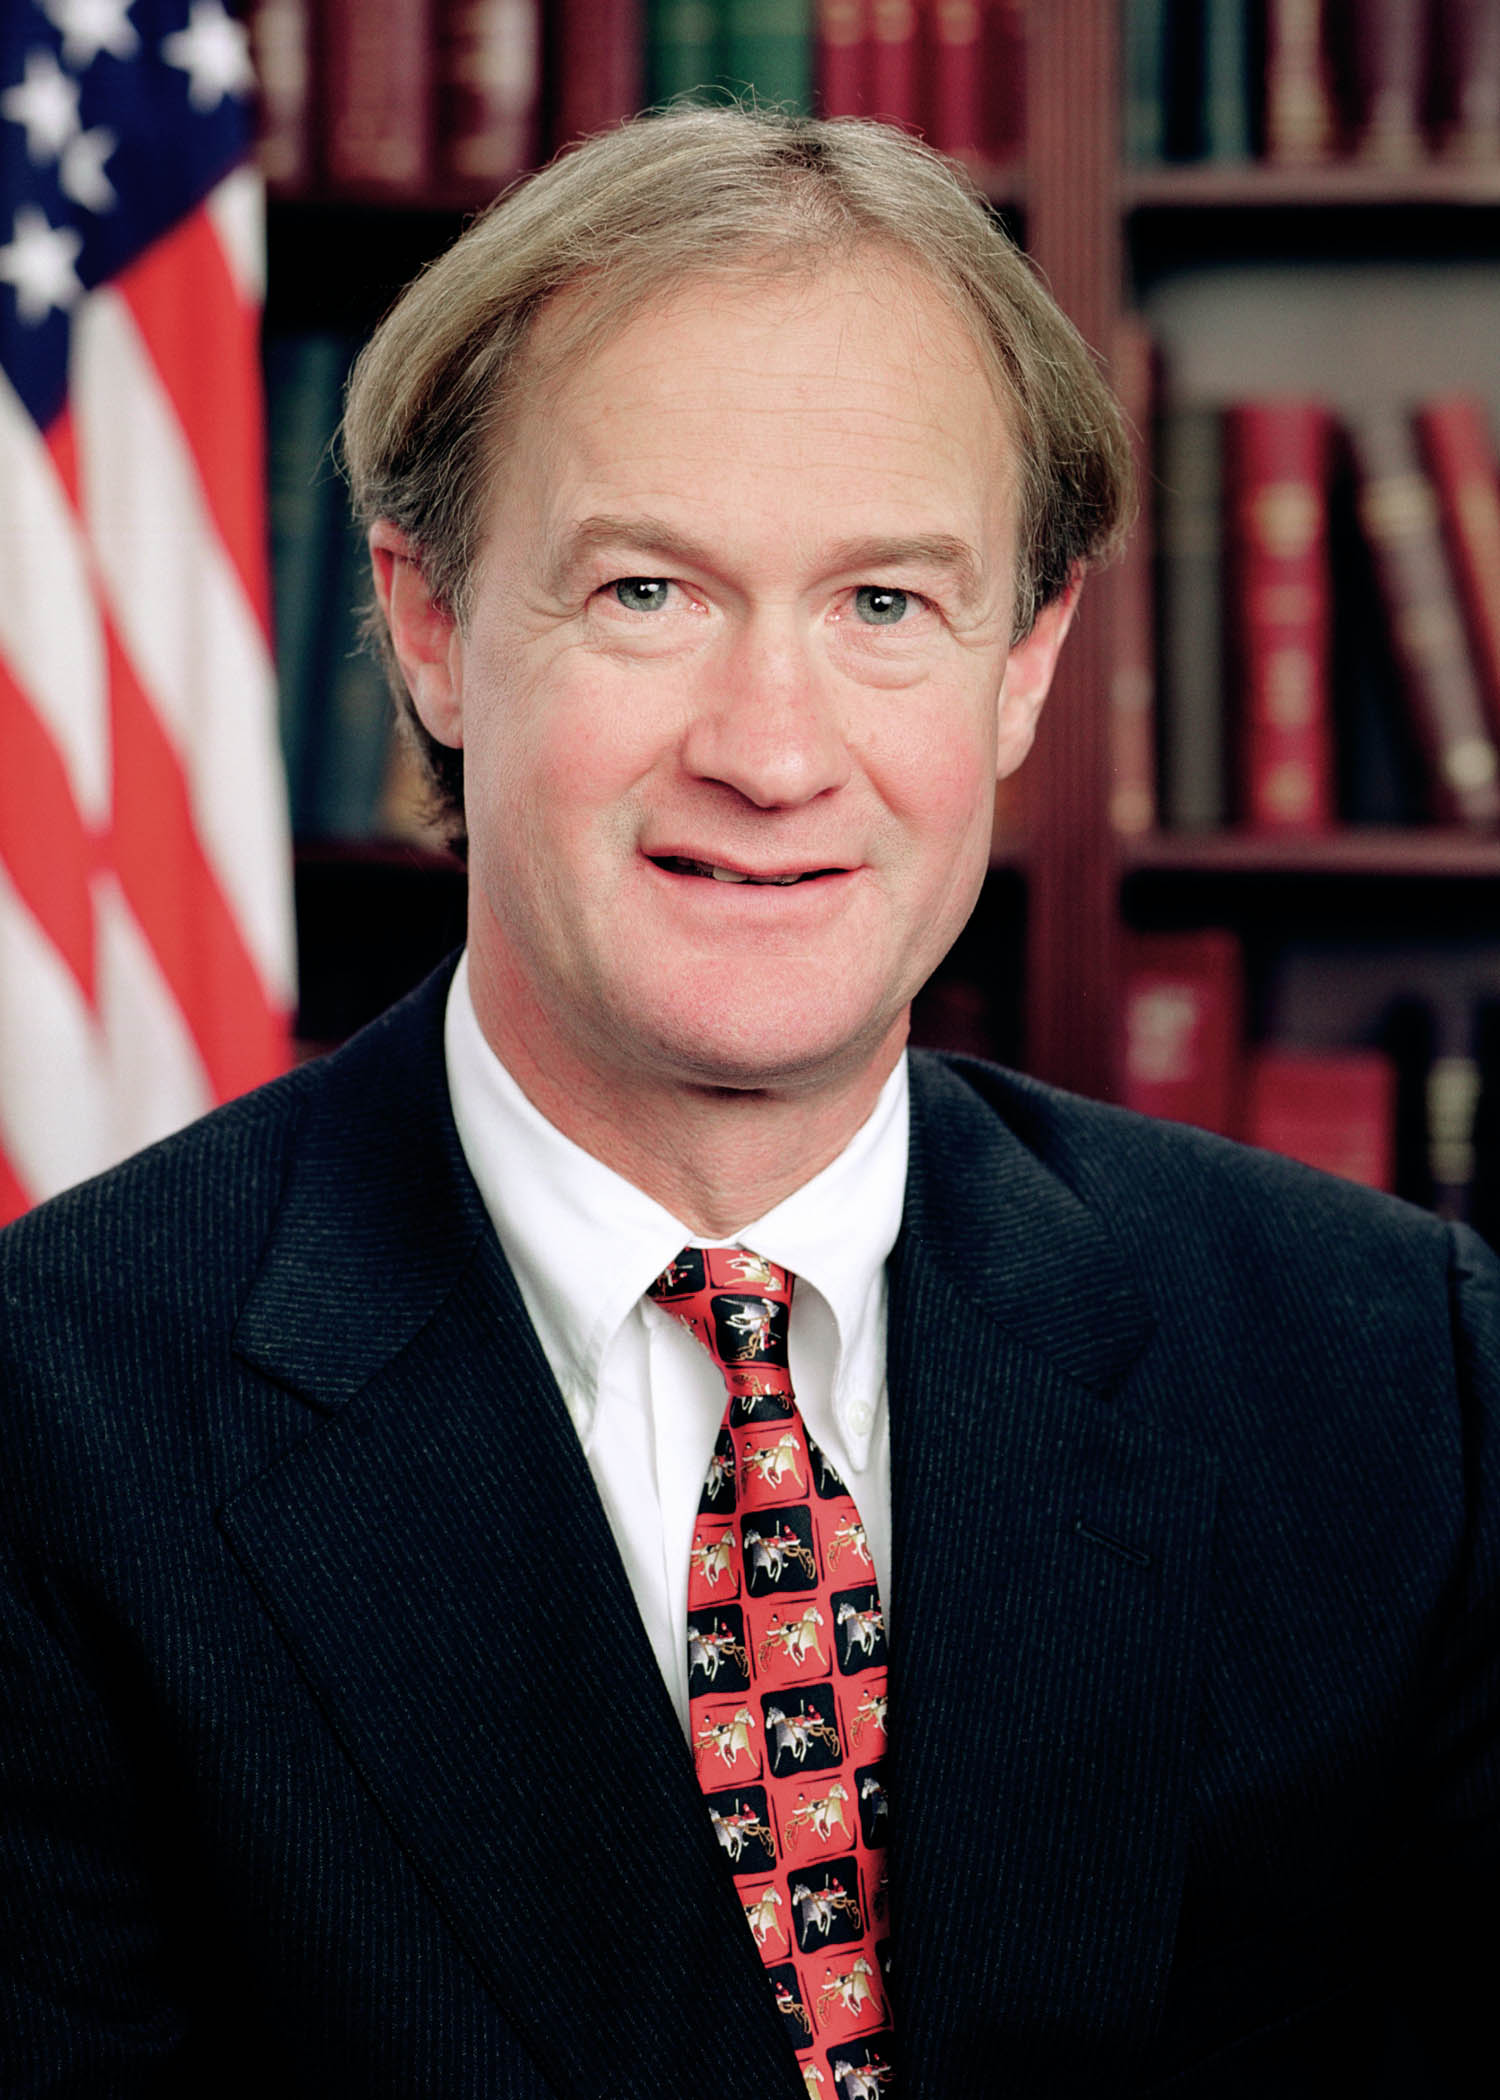 Lincoln_Chafee_official_portrait.jpg